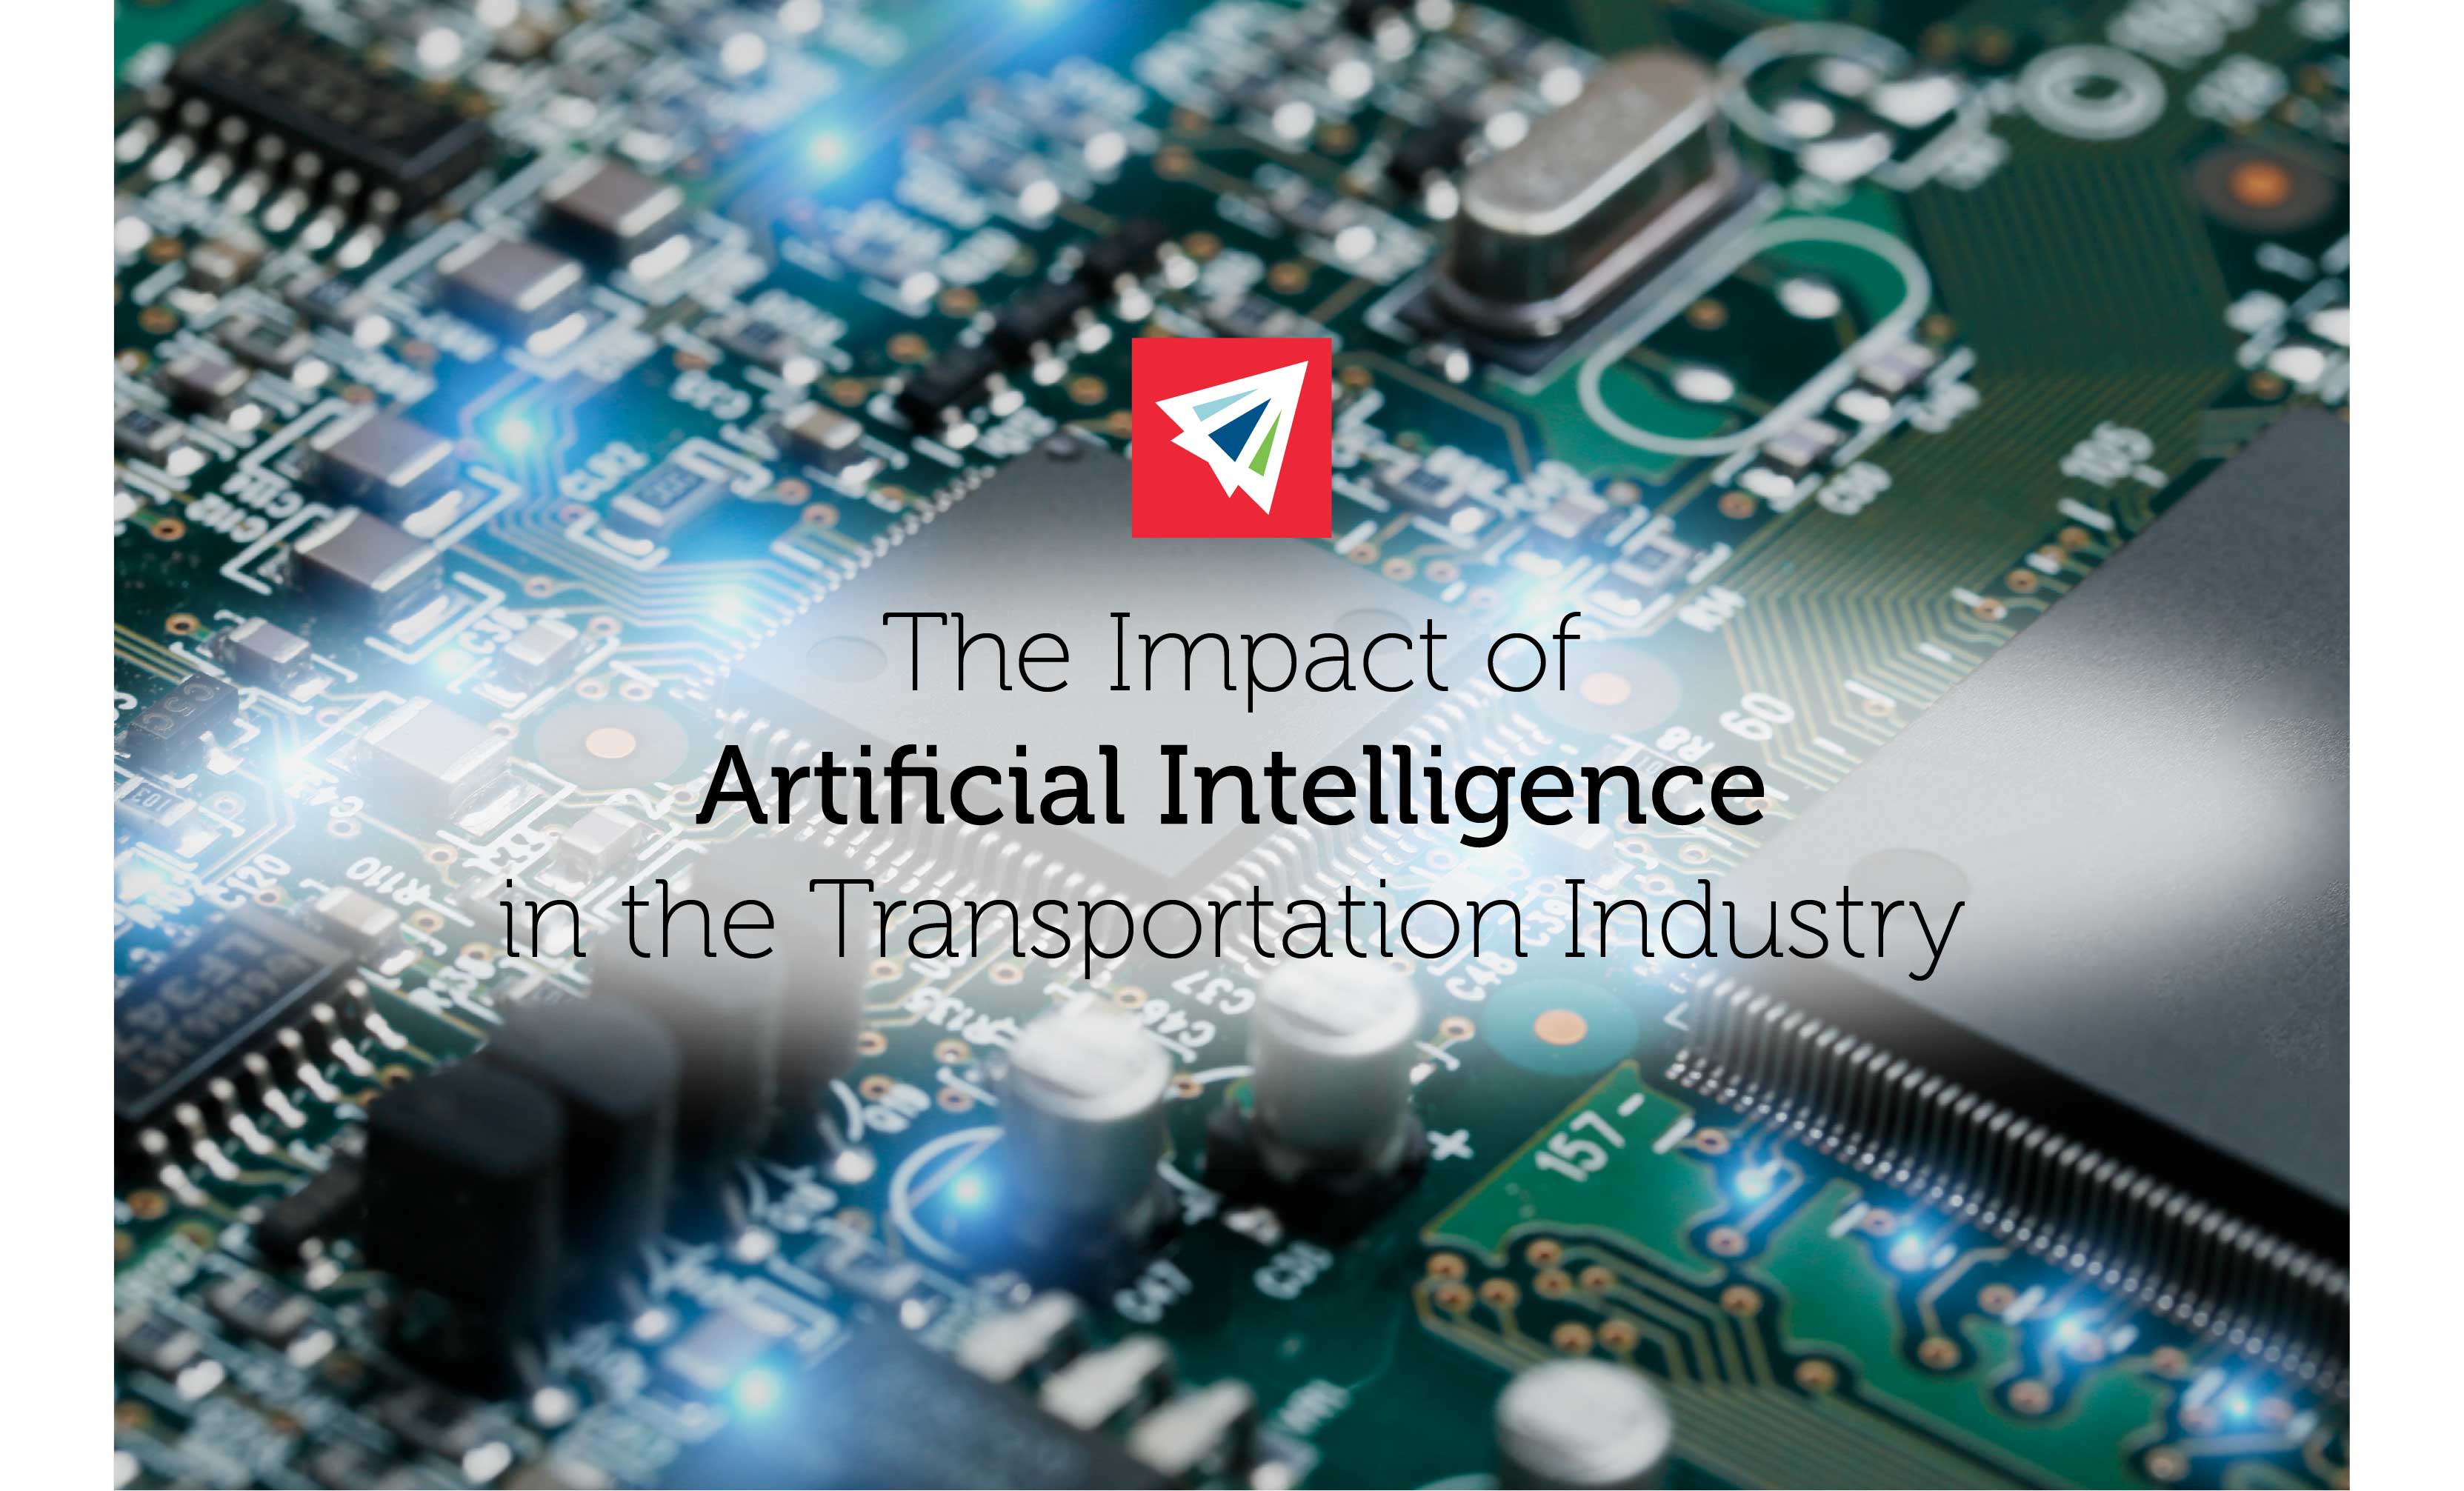 The Impact of Artificial Intelligence in Transportation